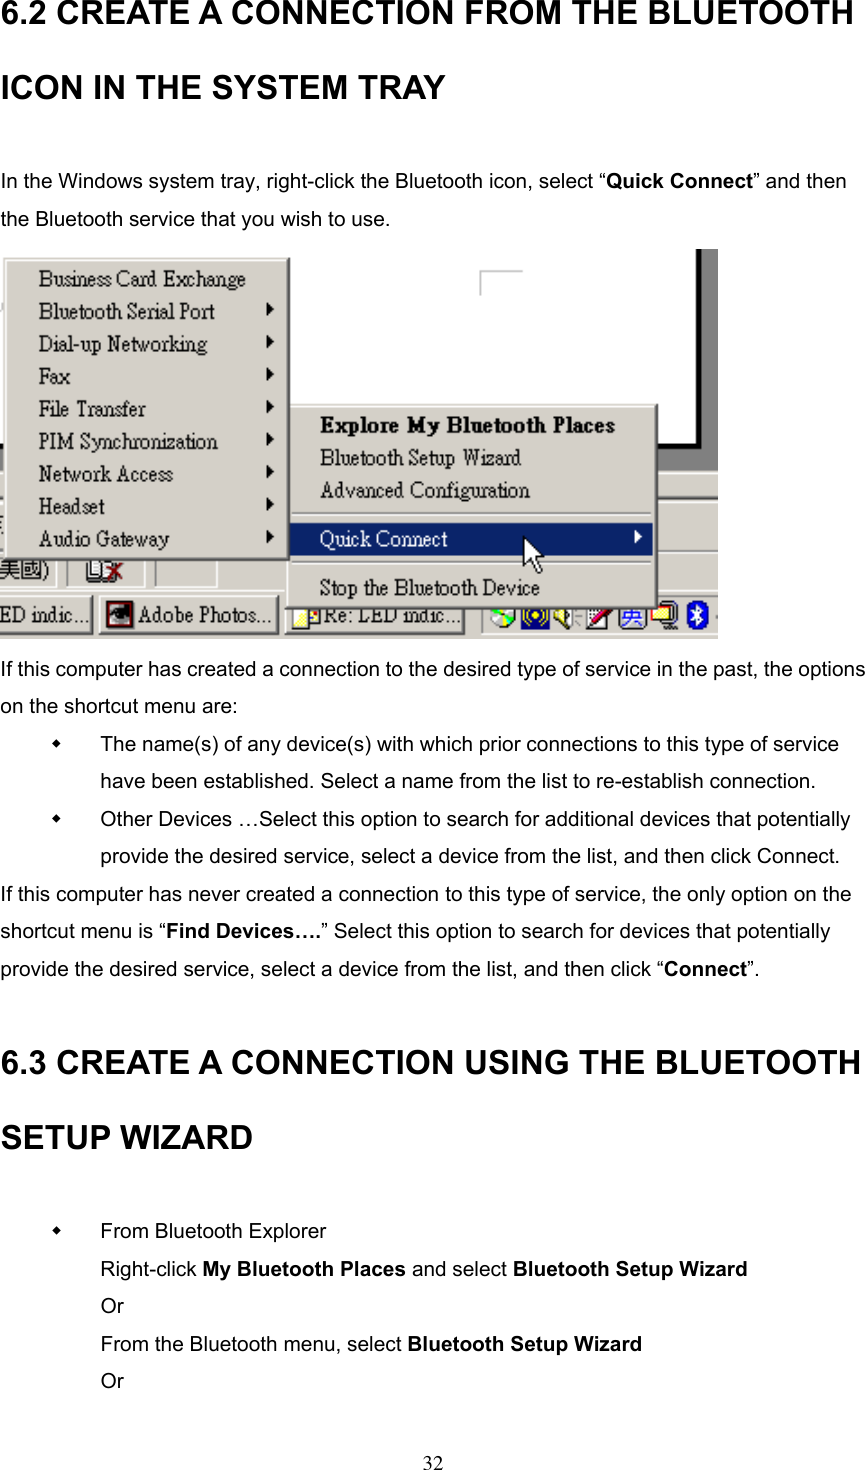 6.2 CREATE A CONNECTION FROM THE BLUETOOTH ICON IN THE SYSTEM TRAY  In the Windows system tray, right-click the Bluetooth icon, select “Quick Connect” and then the Bluetooth service that you wish to use.    If this computer has created a connection to the desired type of service in the past, the options on the shortcut menu are:   The name(s) of any device(s) with which prior connections to this type of service have been established. Select a name from the list to re-establish connection.   Other Devices …Select this option to search for additional devices that potentially provide the desired service, select a device from the list, and then click Connect. If this computer has never created a connection to this type of service, the only option on the shortcut menu is “Find Devices….” Select this option to search for devices that potentially provide the desired service, select a device from the list, and then click “Connect”.  6.3 CREATE A CONNECTION USING THE BLUETOOTH SETUP WIZARD    From Bluetooth Explorer Right-click My Bluetooth Places and select Bluetooth Setup Wizard Or From the Bluetooth menu, select Bluetooth Setup Wizard Or   32 